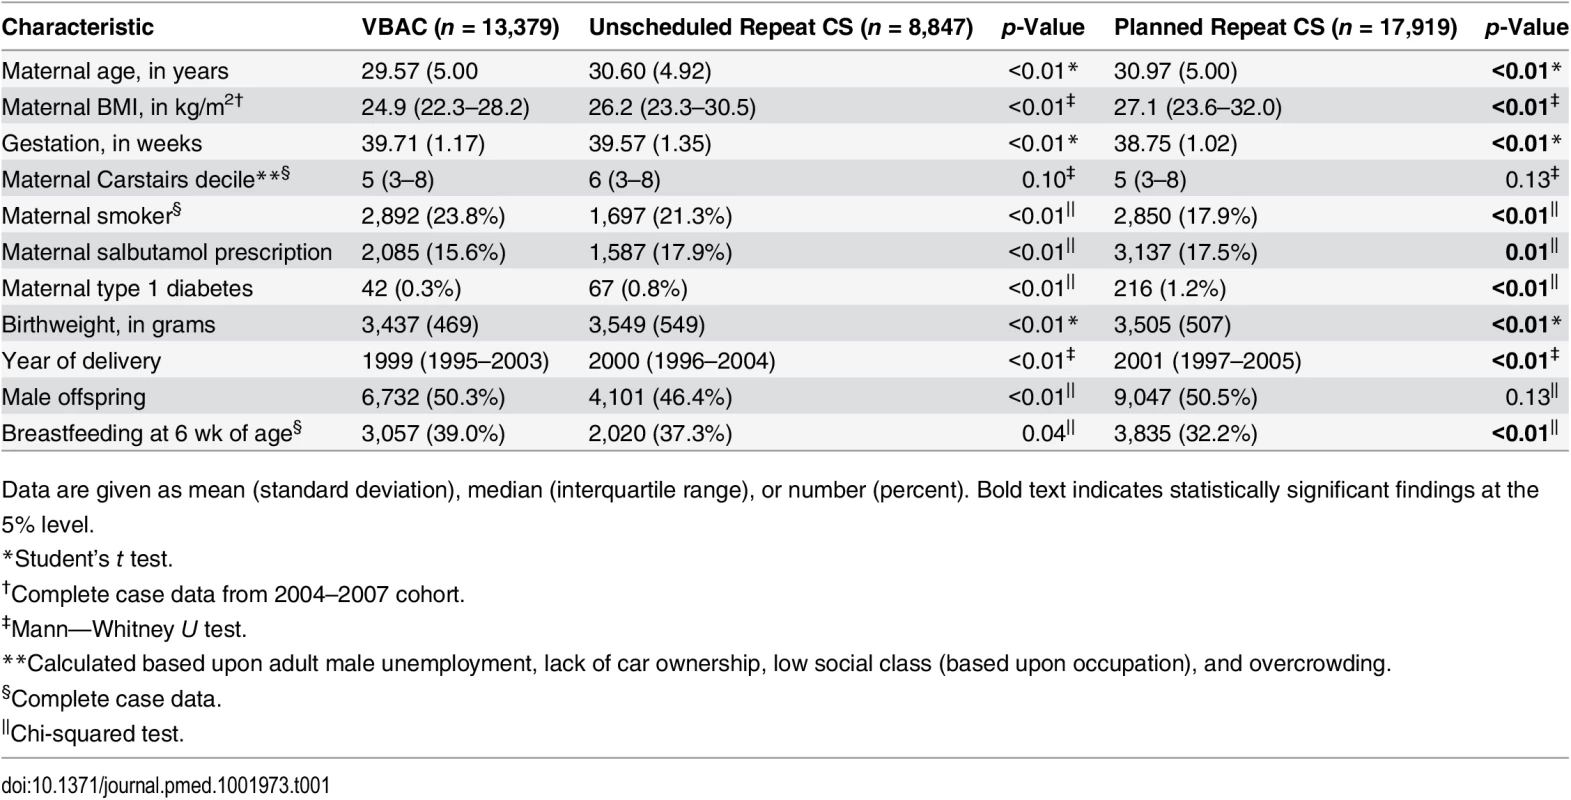 Demographic characteristics of the planned and unscheduled repeat cesarean groups compared to the VBAC group.